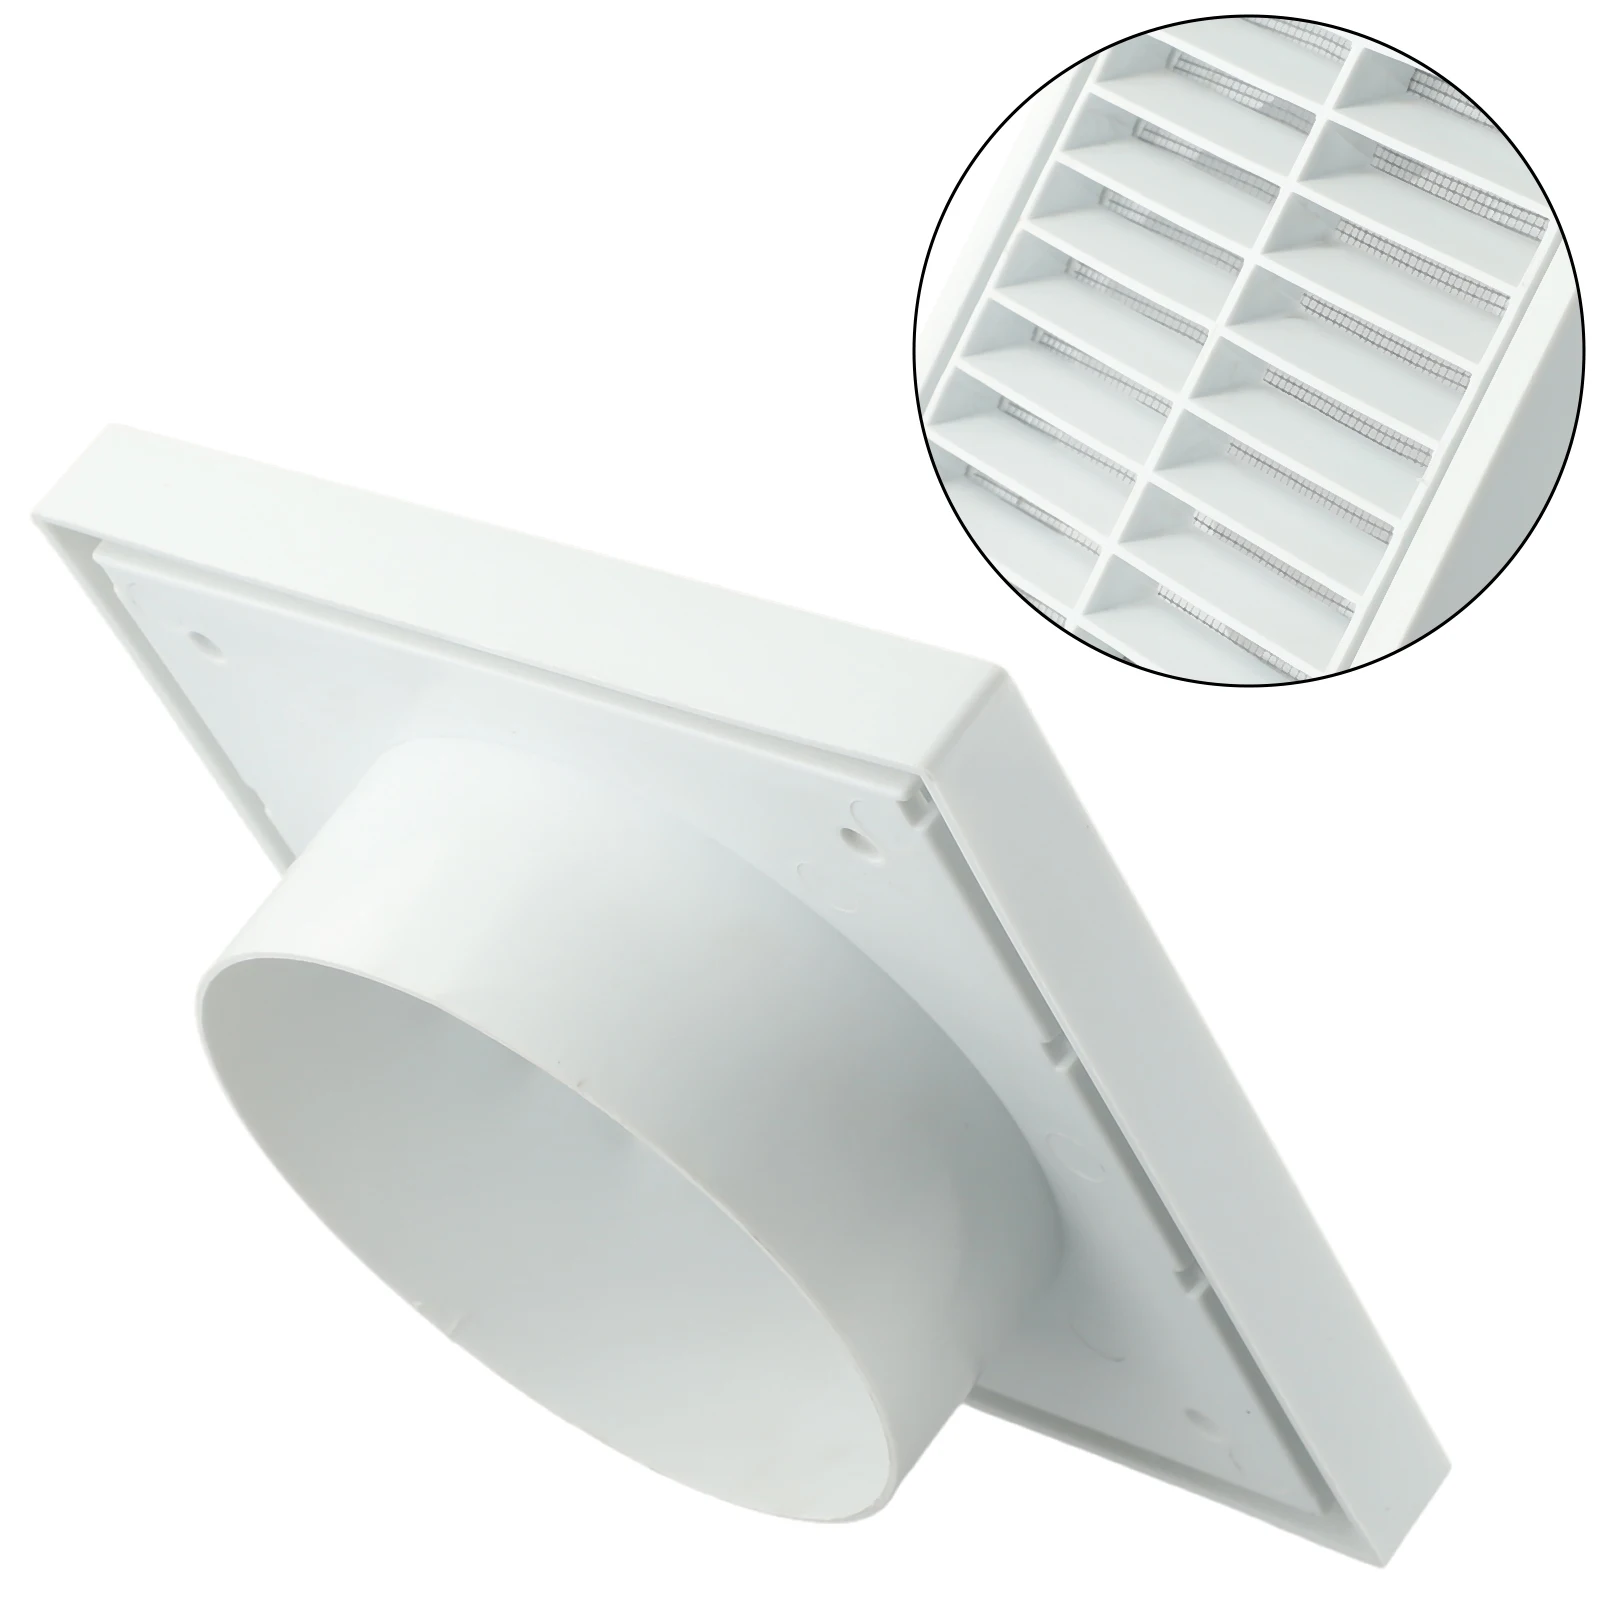 

Efficient Ventilation Grille Durable PP Material Suitable for Wall or Ceiling Openings Vermin and Rodent Protection White